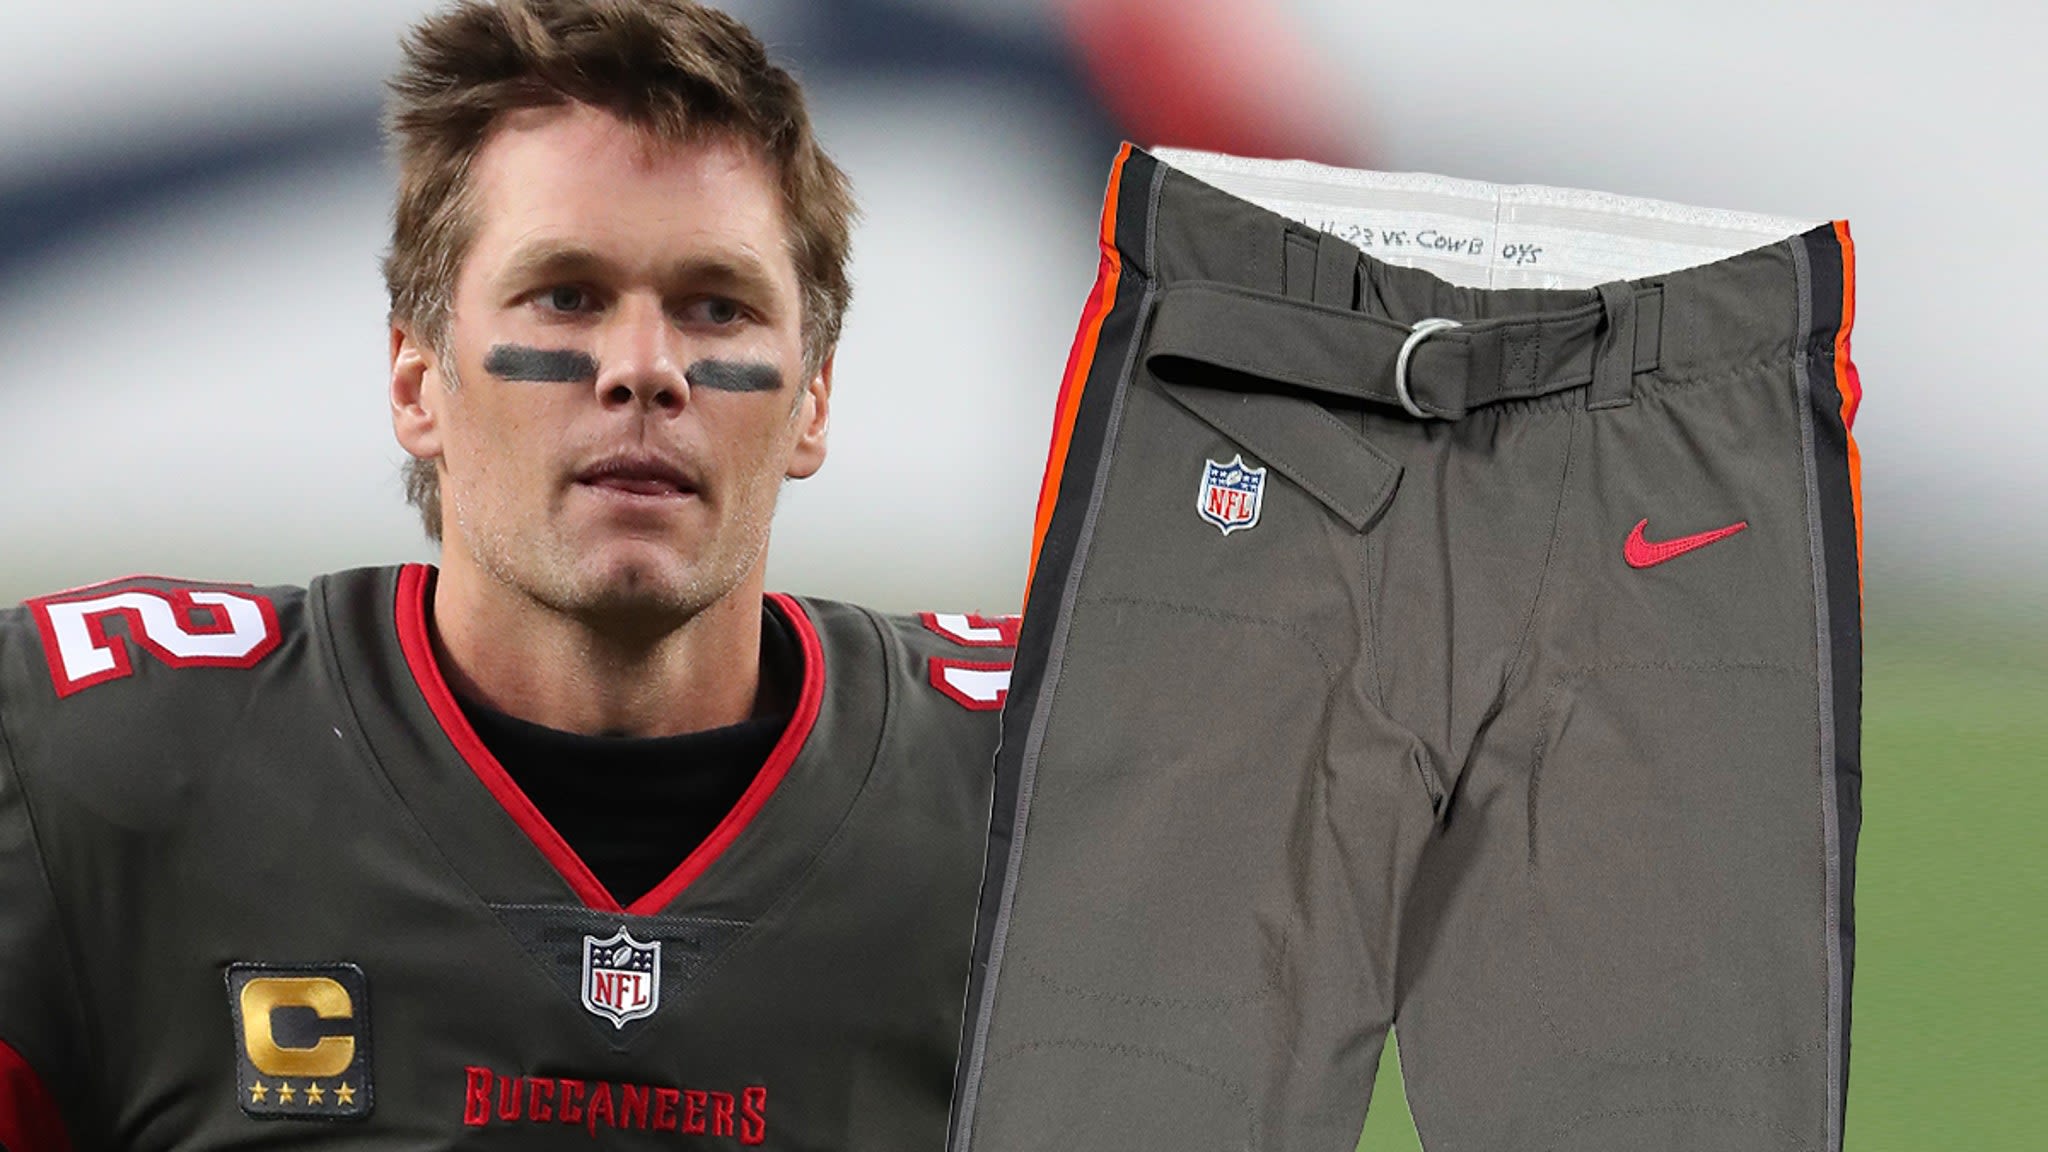 Tom Brady's Buccaneers Pants From Final NFL Game Hit Auction Block